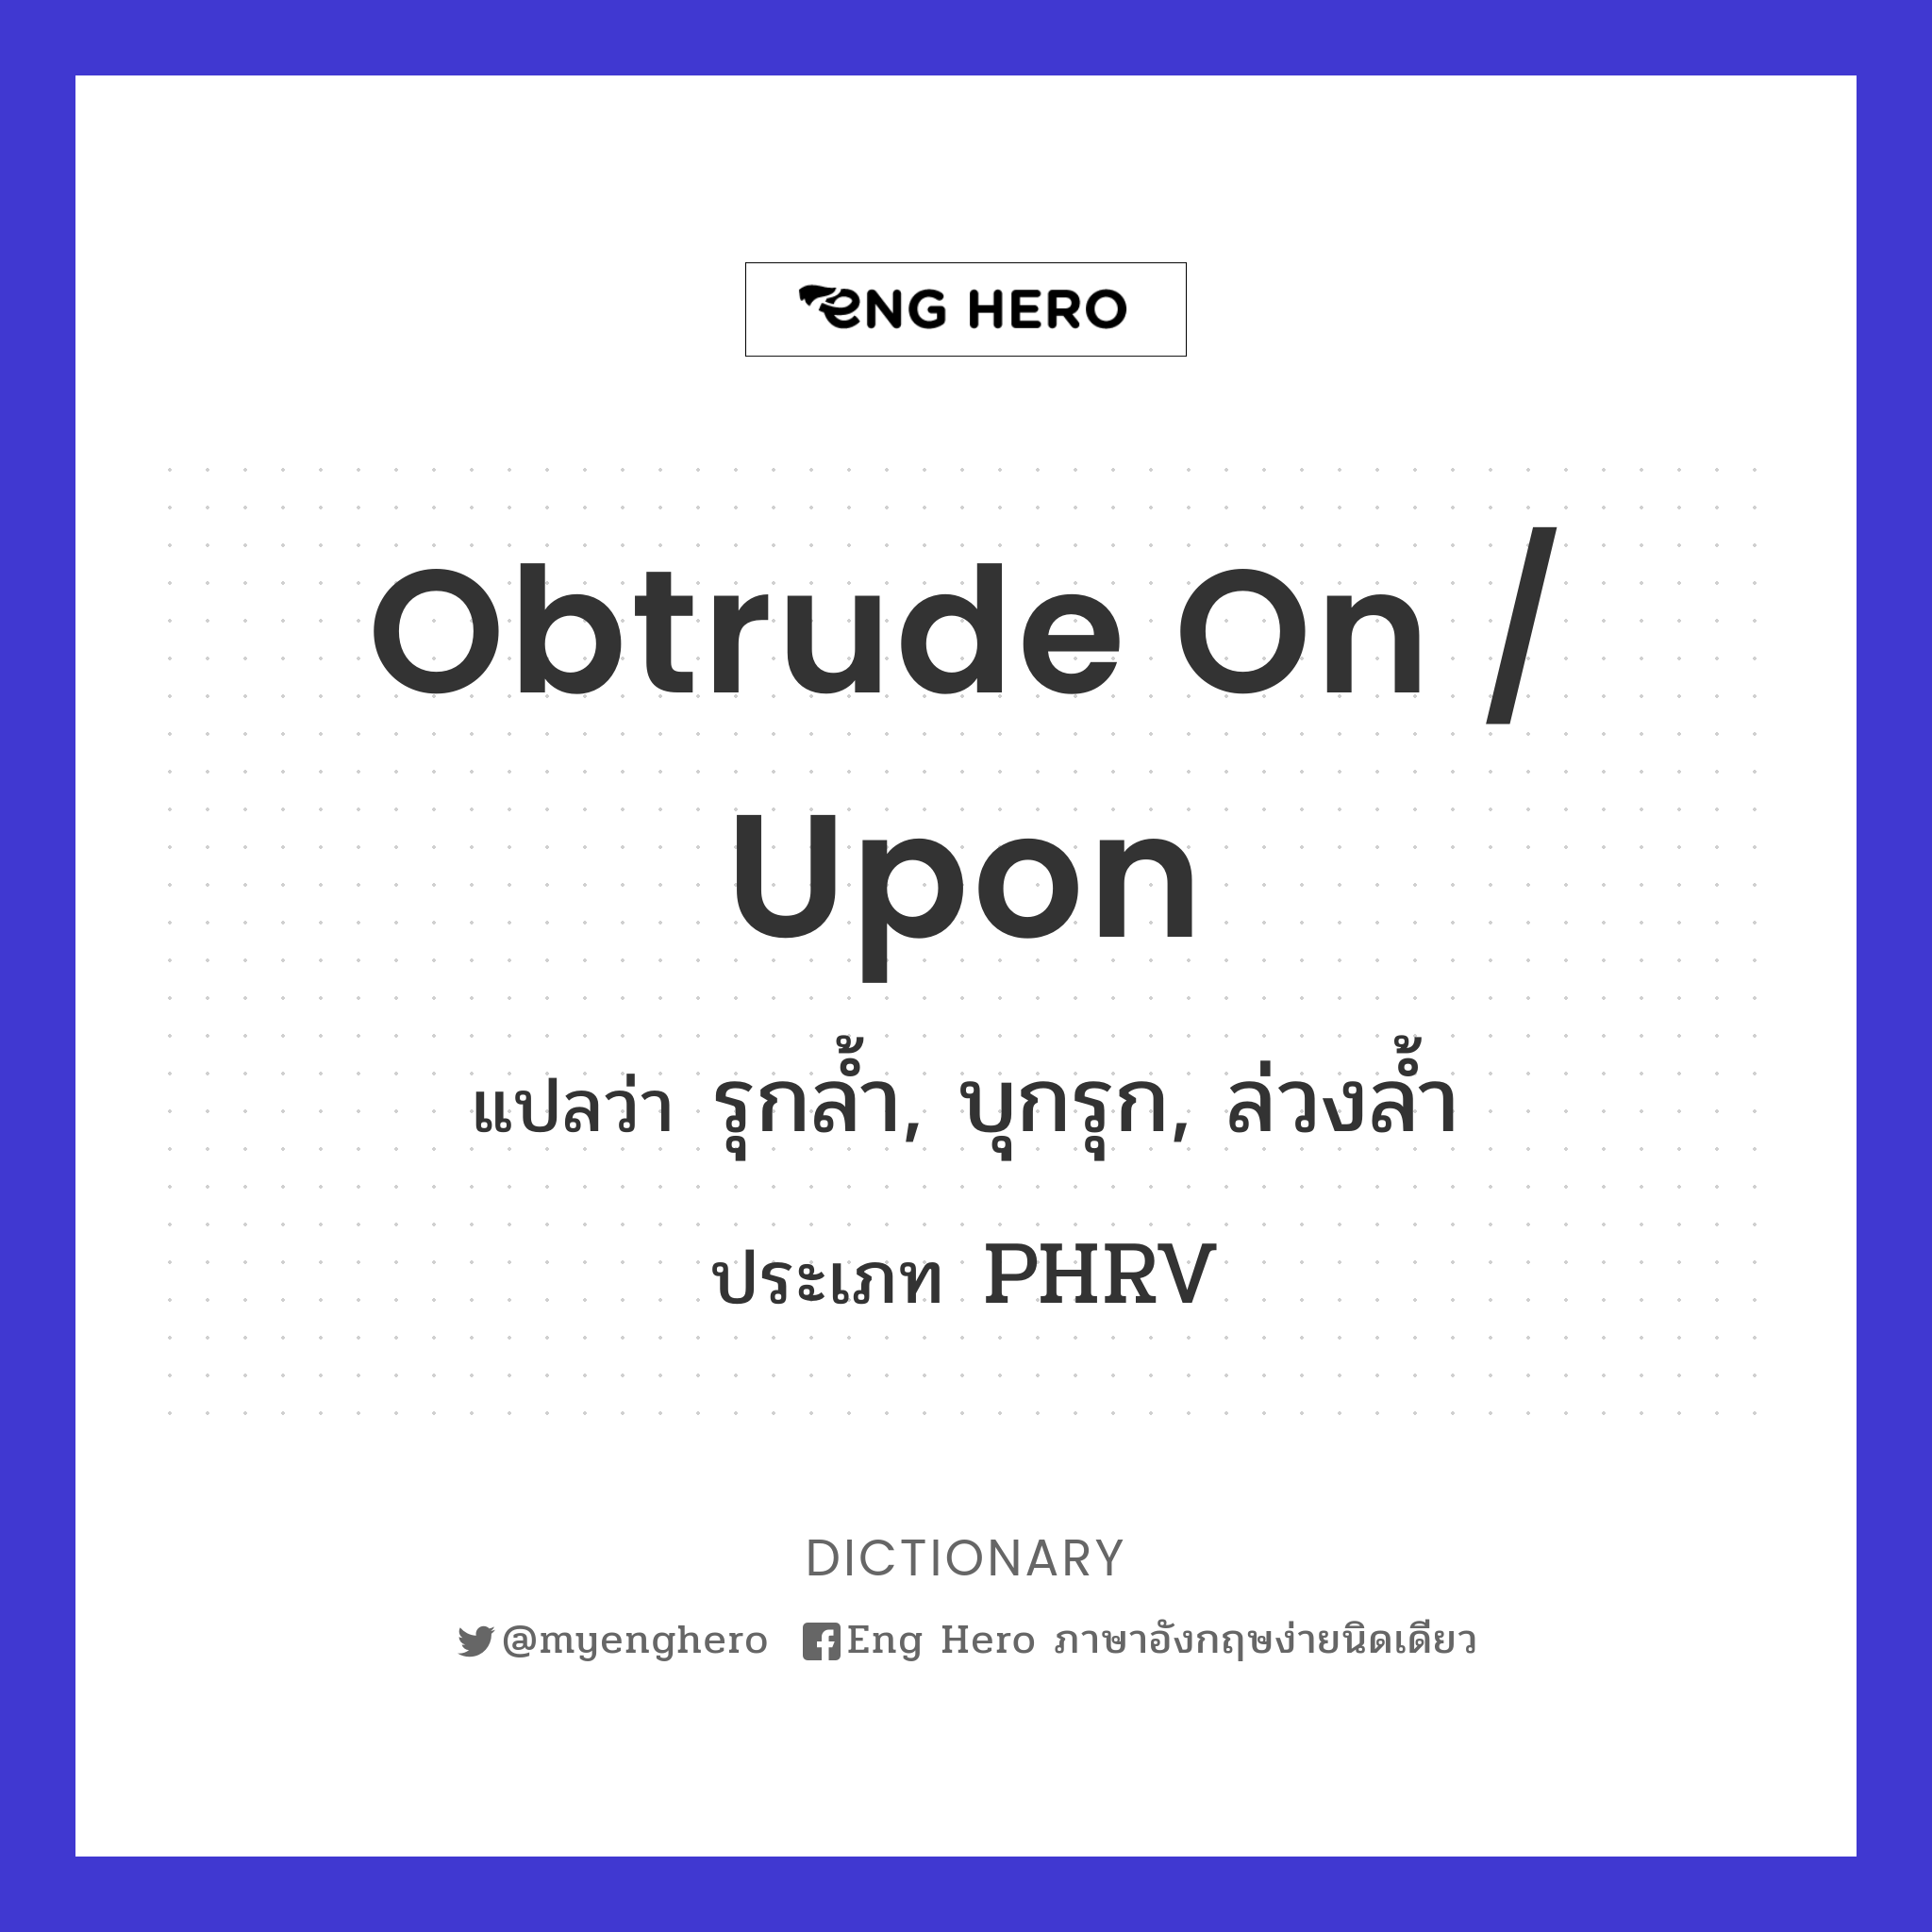 obtrude on / upon